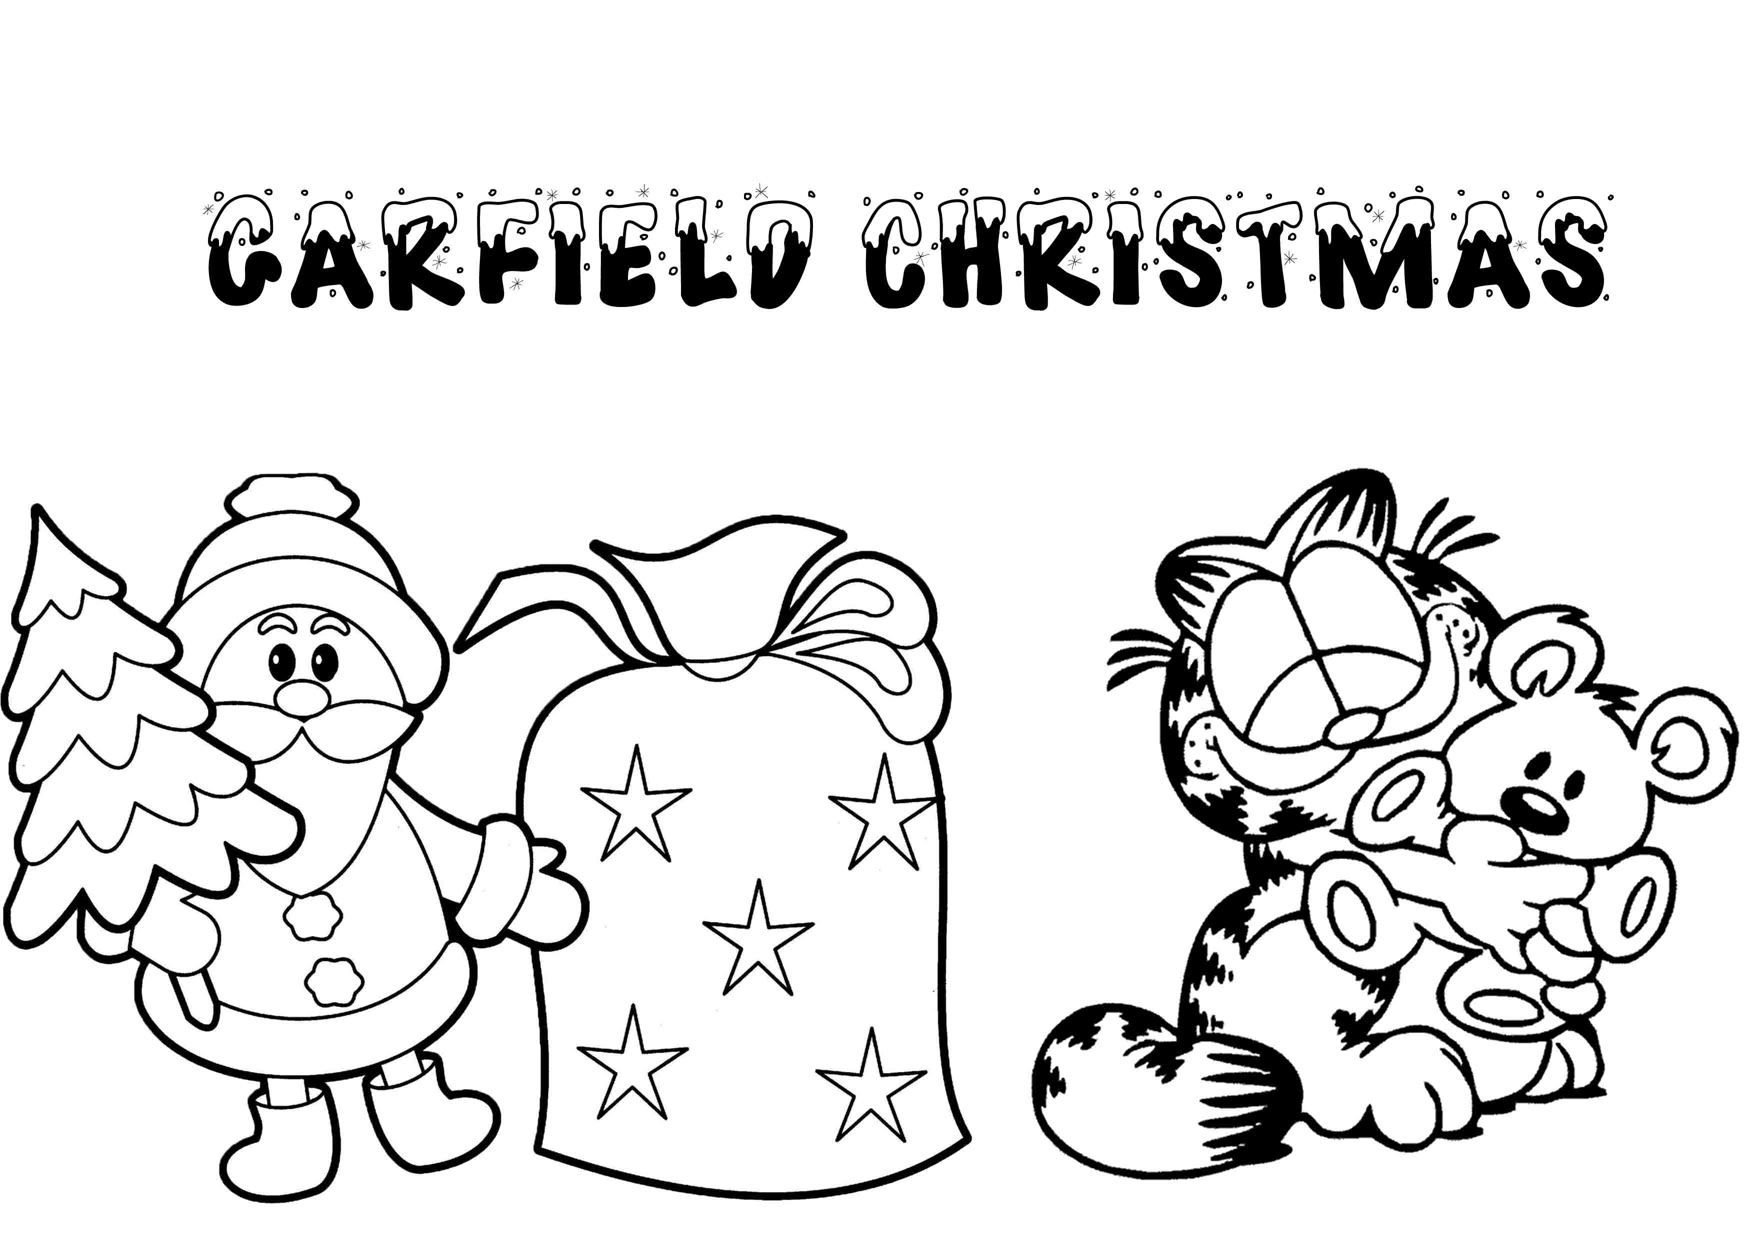 garfield-christmas-coloring-pages-printable | | BestAppsForKids.com